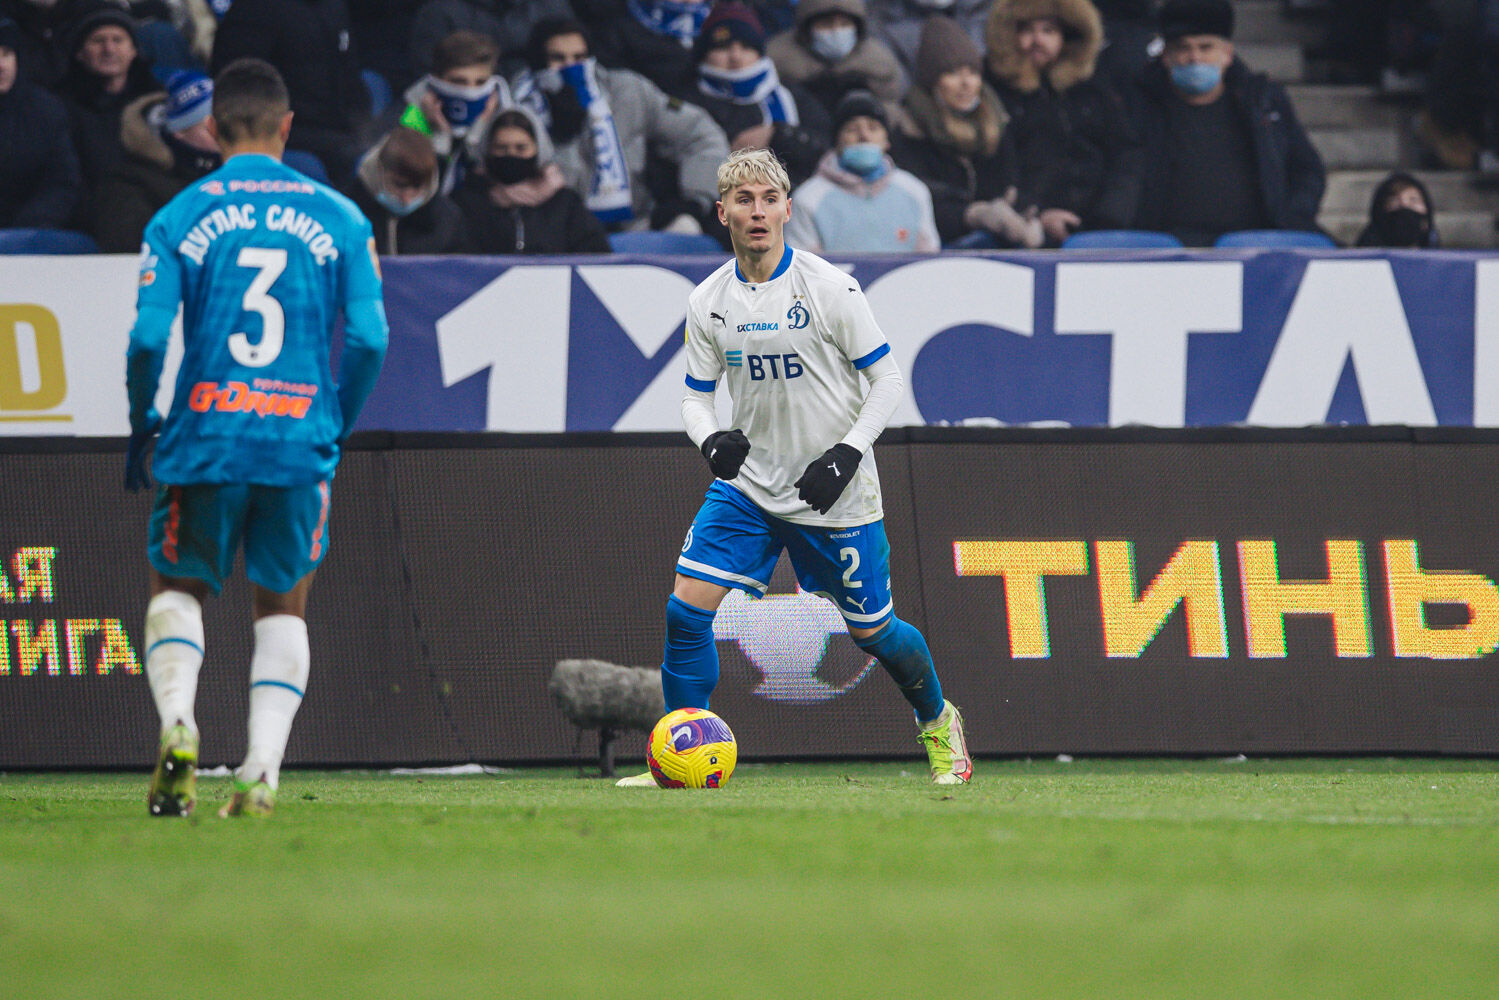 Photo gallery from the match against Zenit